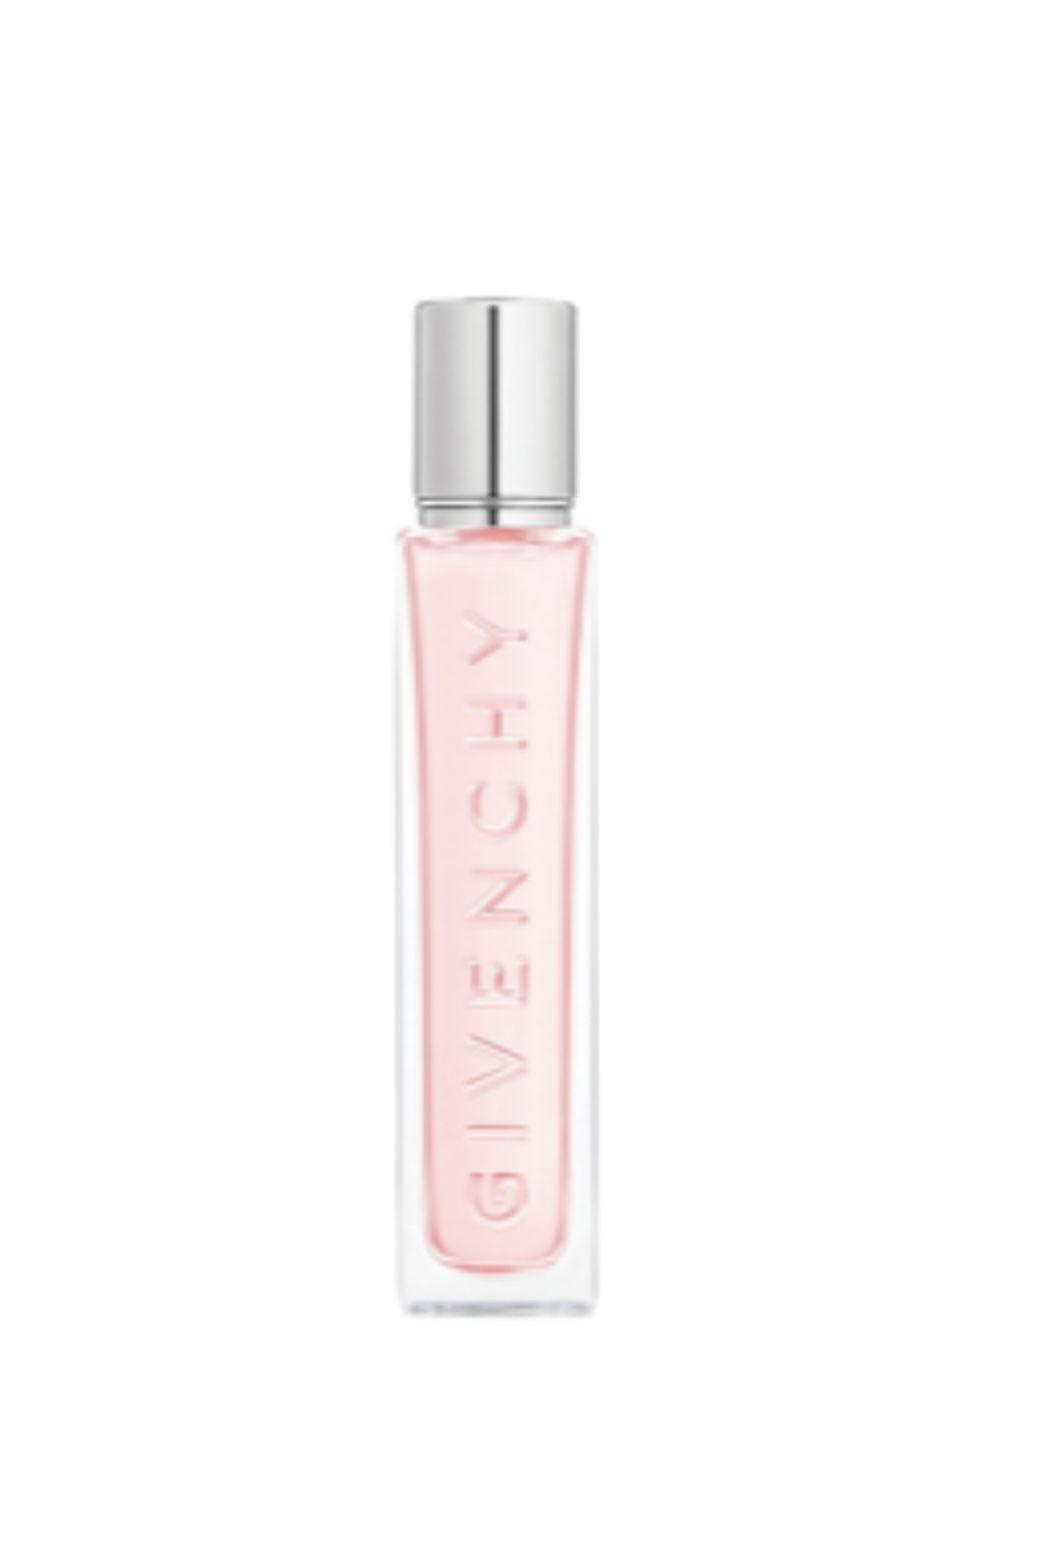 New Givenchy Women’s fragrance 10 ml